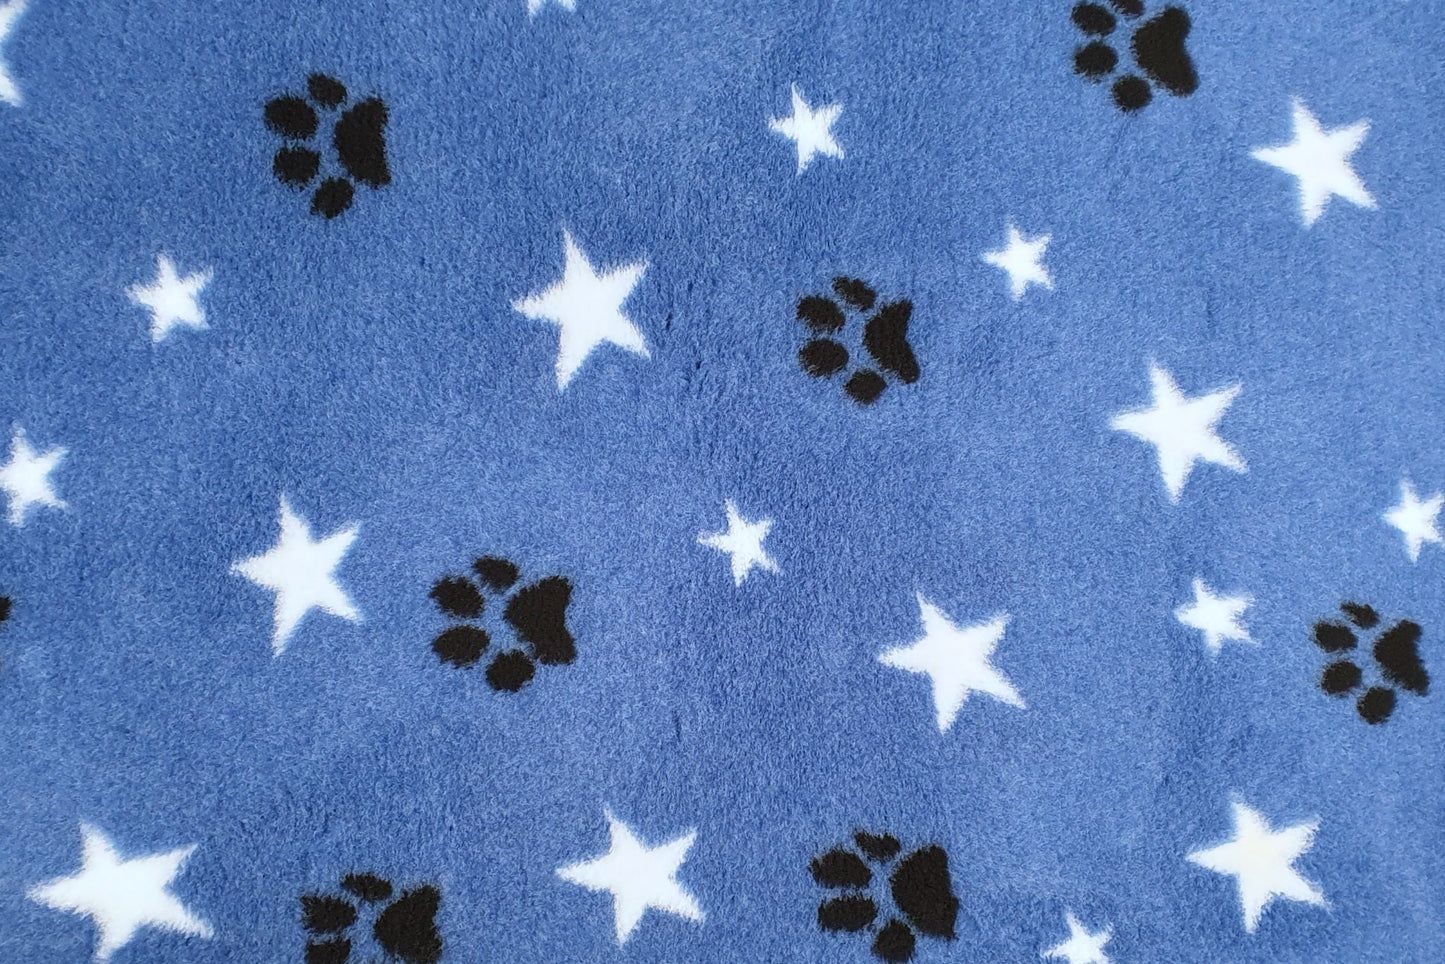 Vet Bed - No Backing - Blue with White Stars and Black Paws